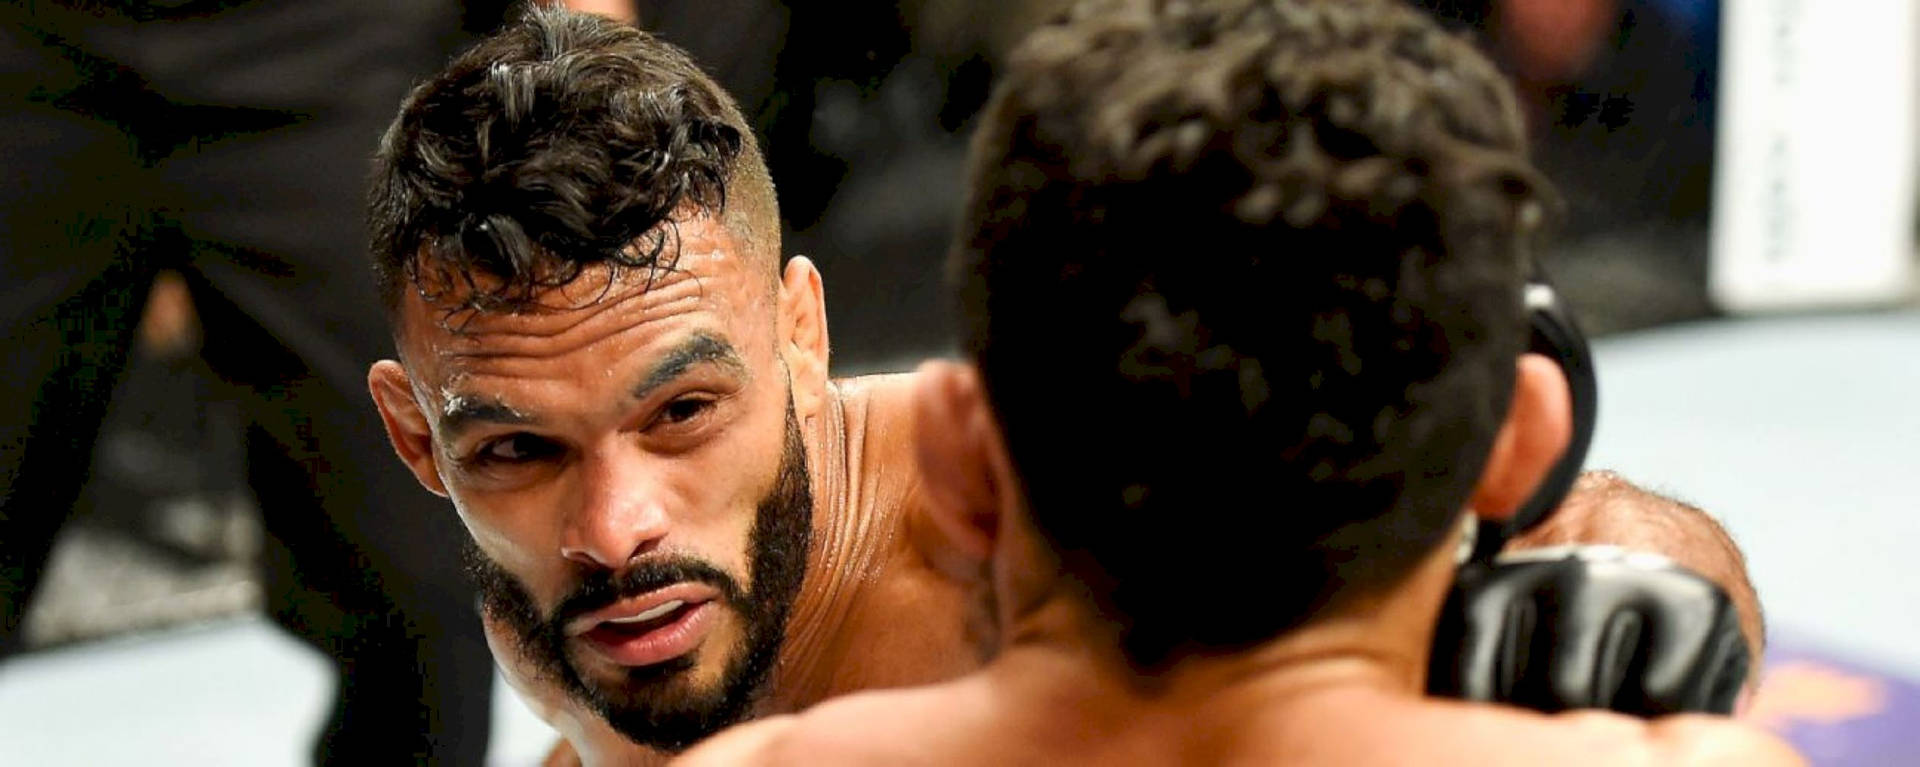 Close-up Of Rob Font During Match Wallpaper